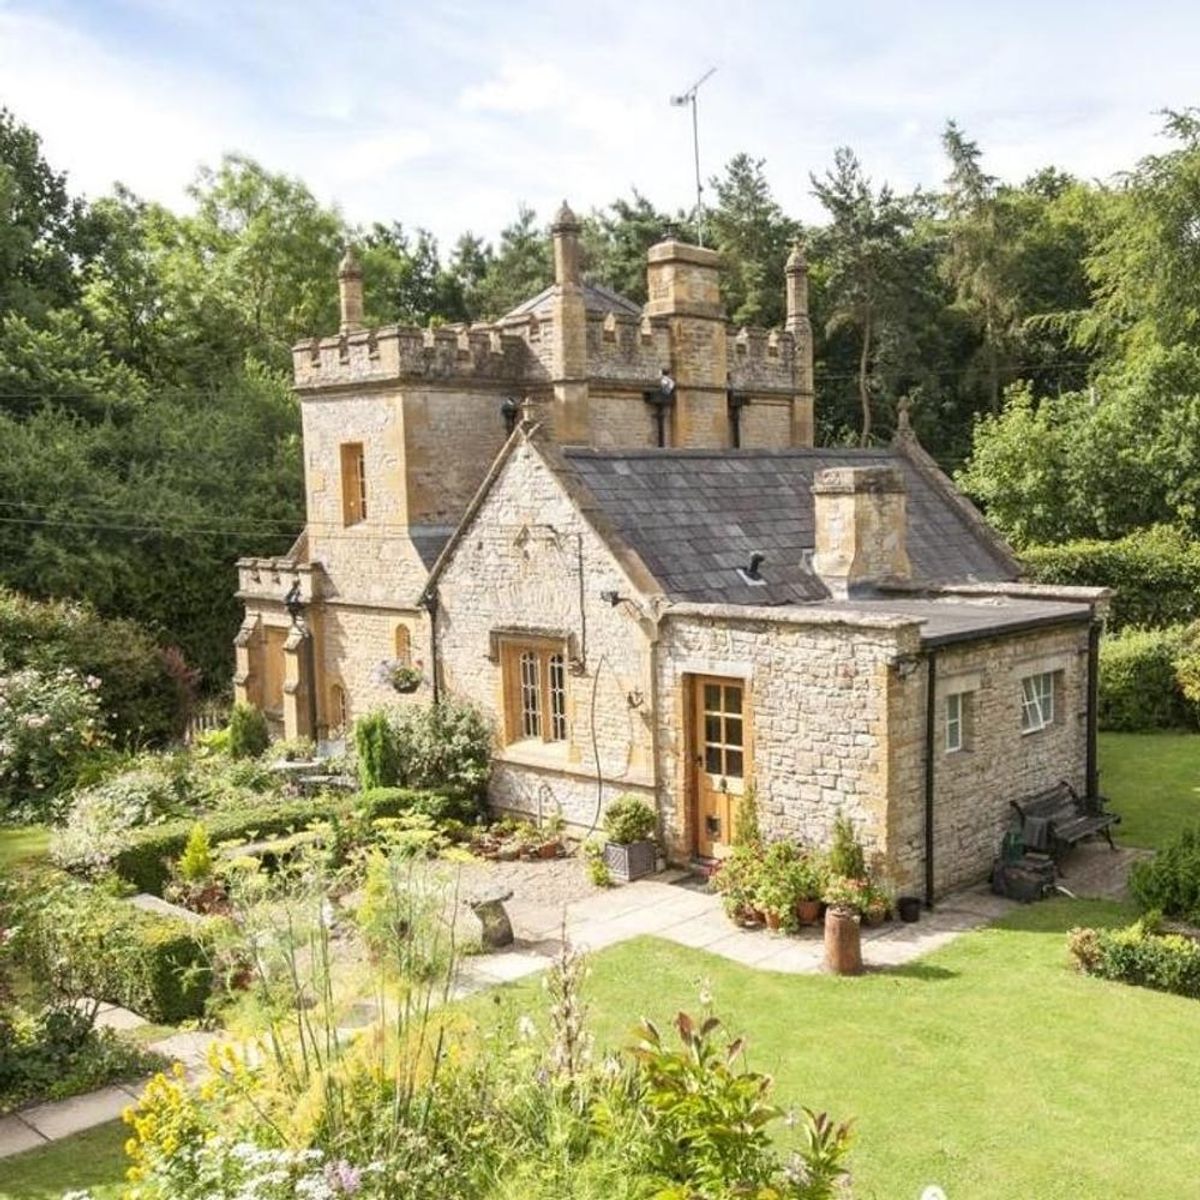 Dream Home Alert: You Can Now Buy a Tiny British Castle